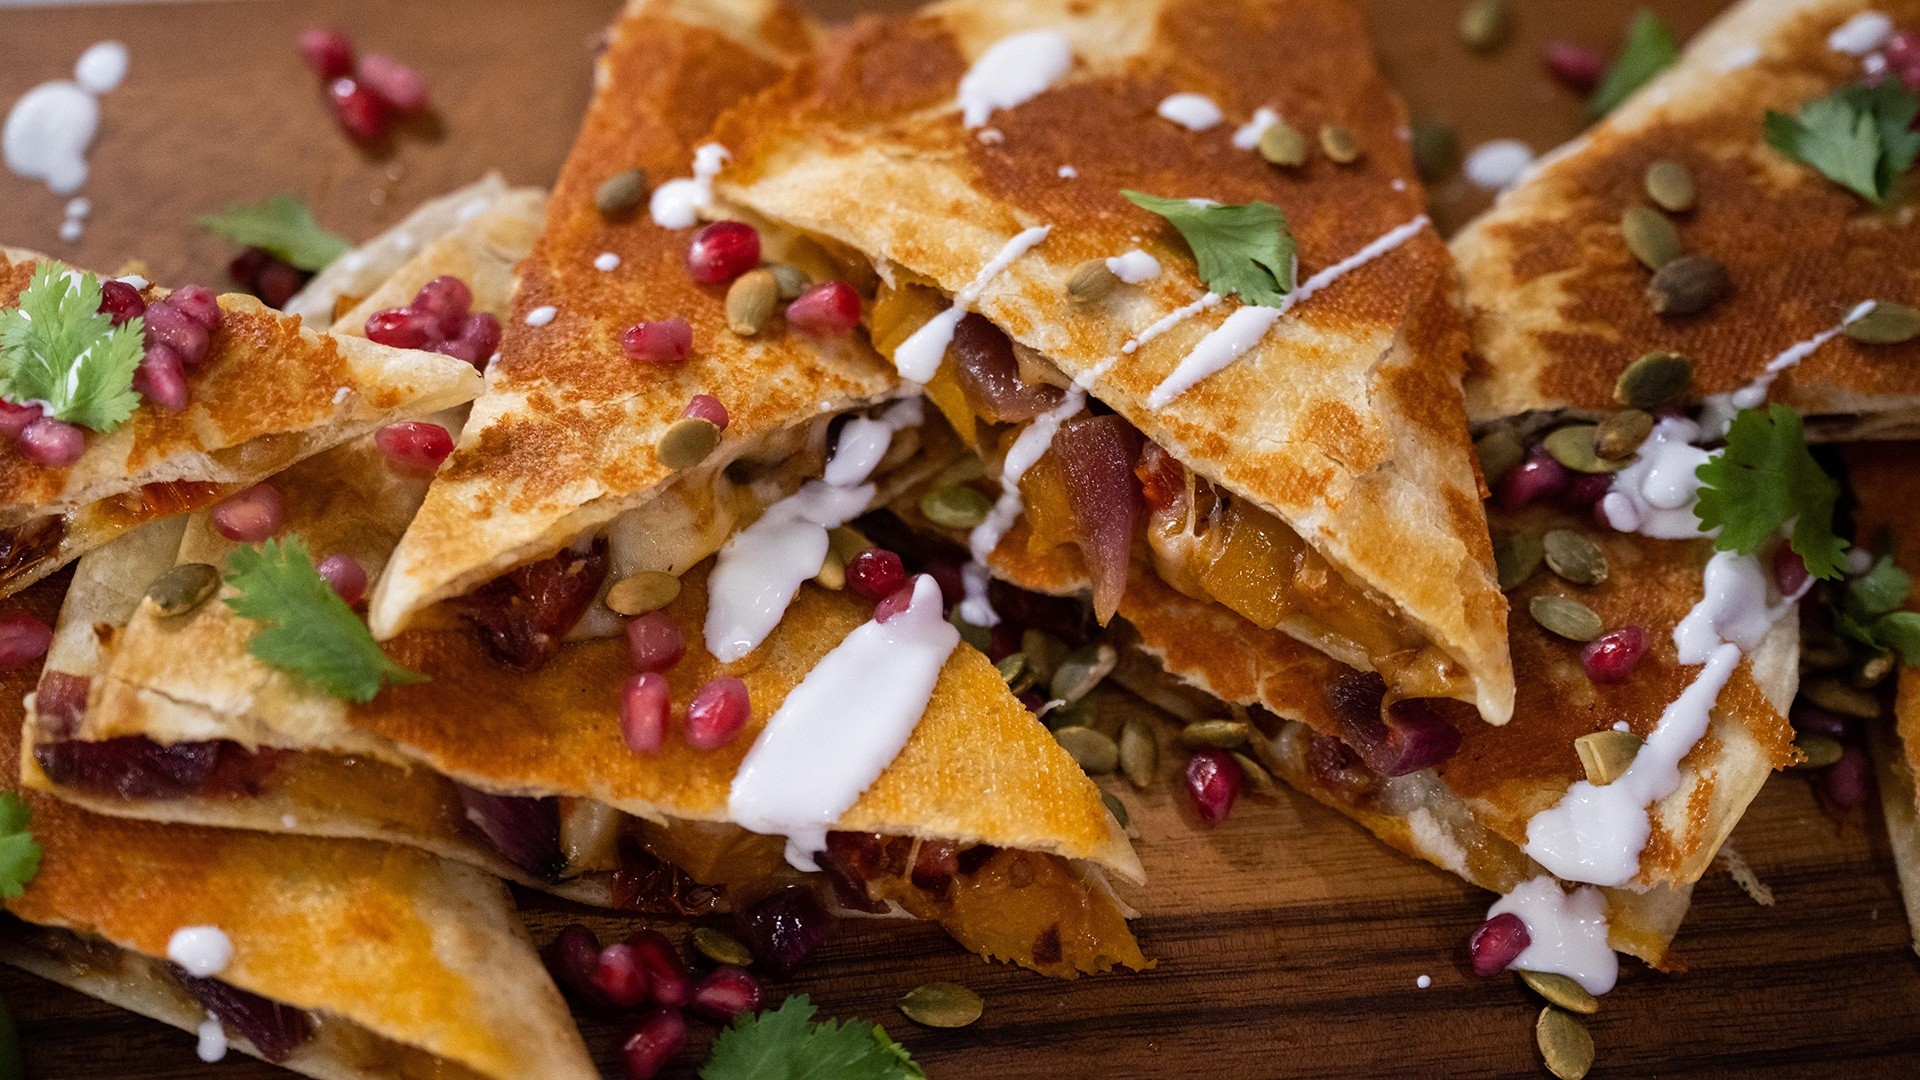 Whip up these quesadillas with leftovers from your fridge!